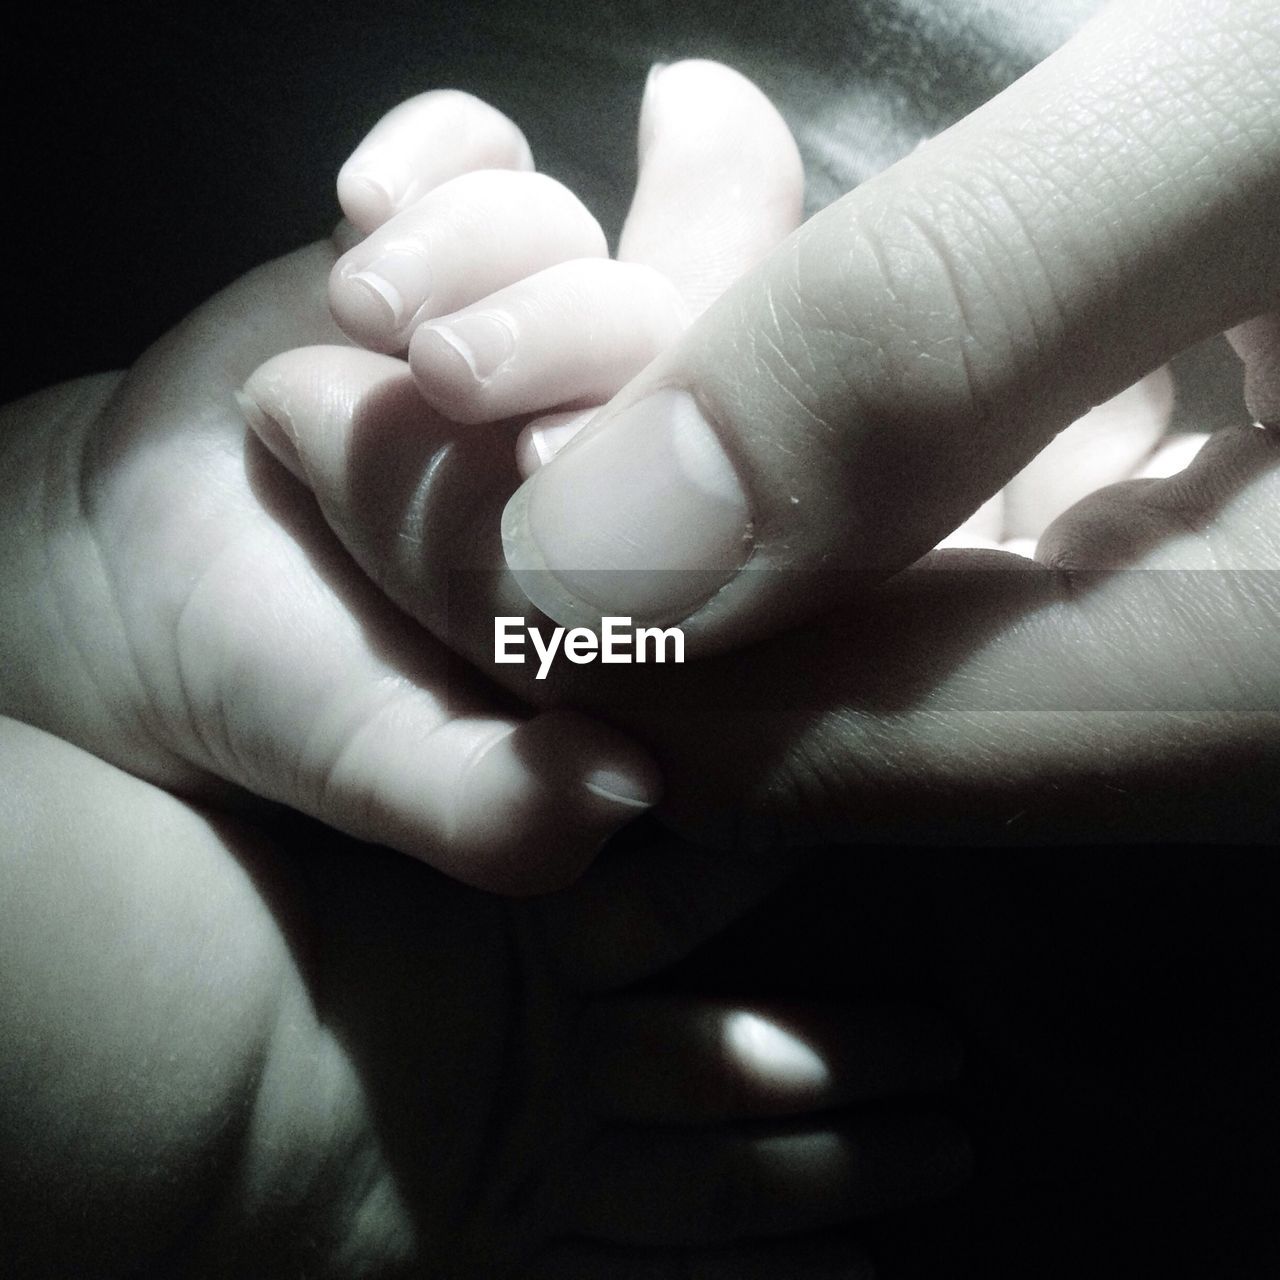 Cropped image of mother holding hands of newborn